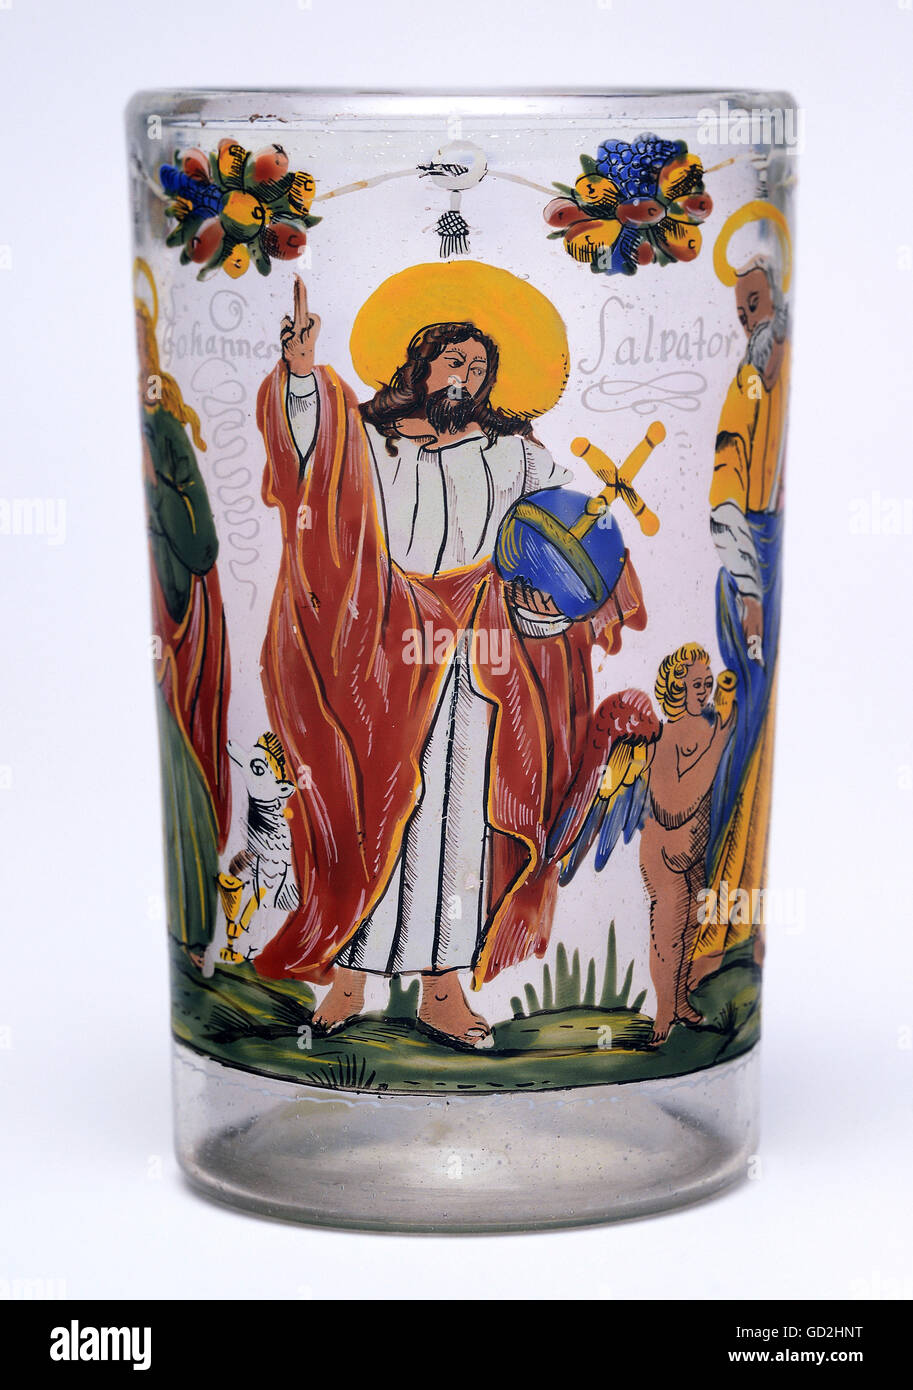 fine arts, glass painting, evangelist goblet, Jesus Christ as Saviour, Germany, late 17th century, Artist's Copyright has not to be cleared Stock Photo